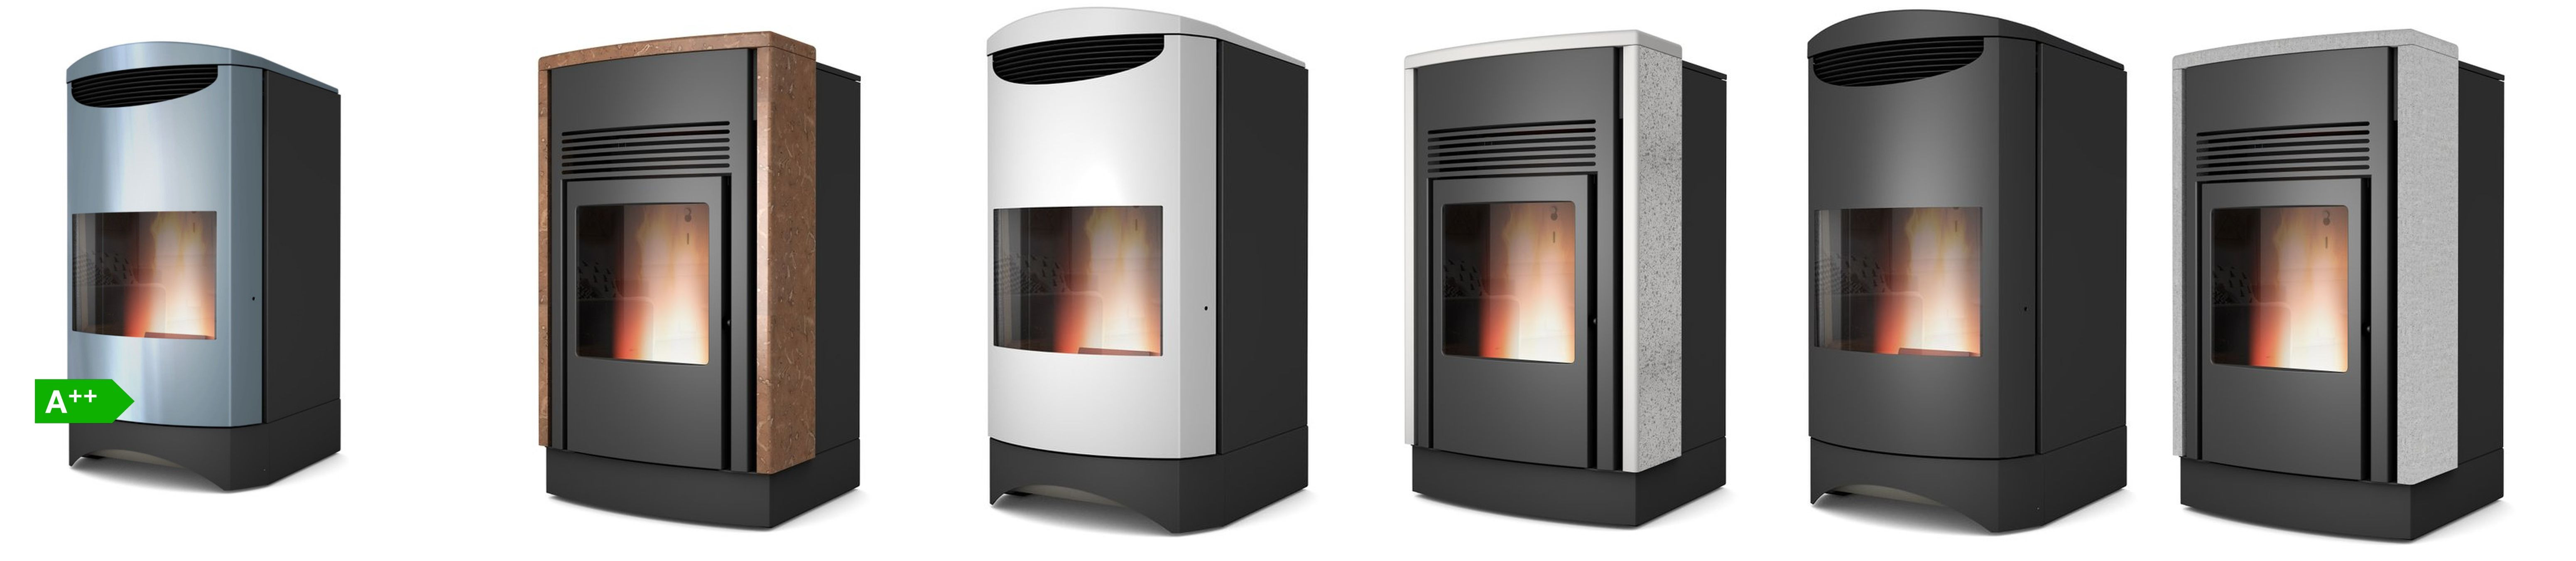 Pellet stoves with or without a chimney, just a hole through the wall.